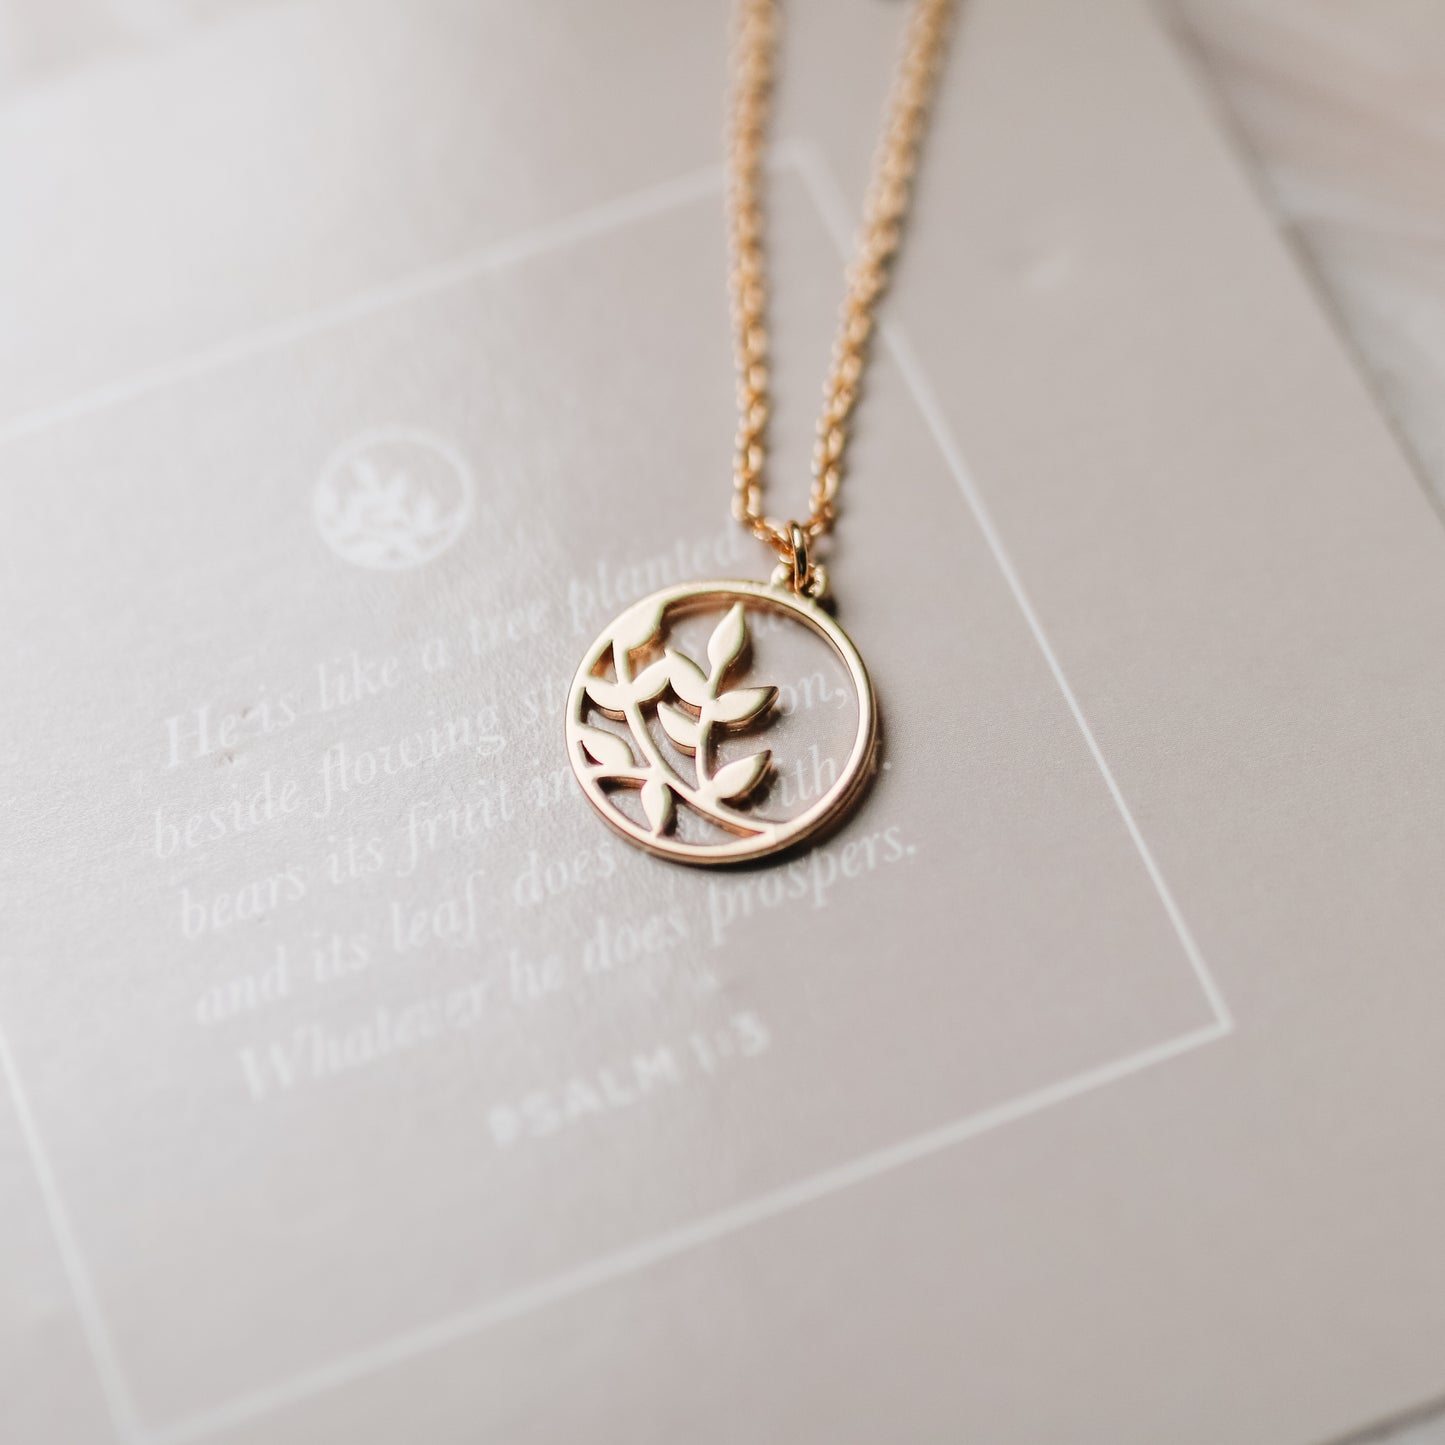 Planted Necklace